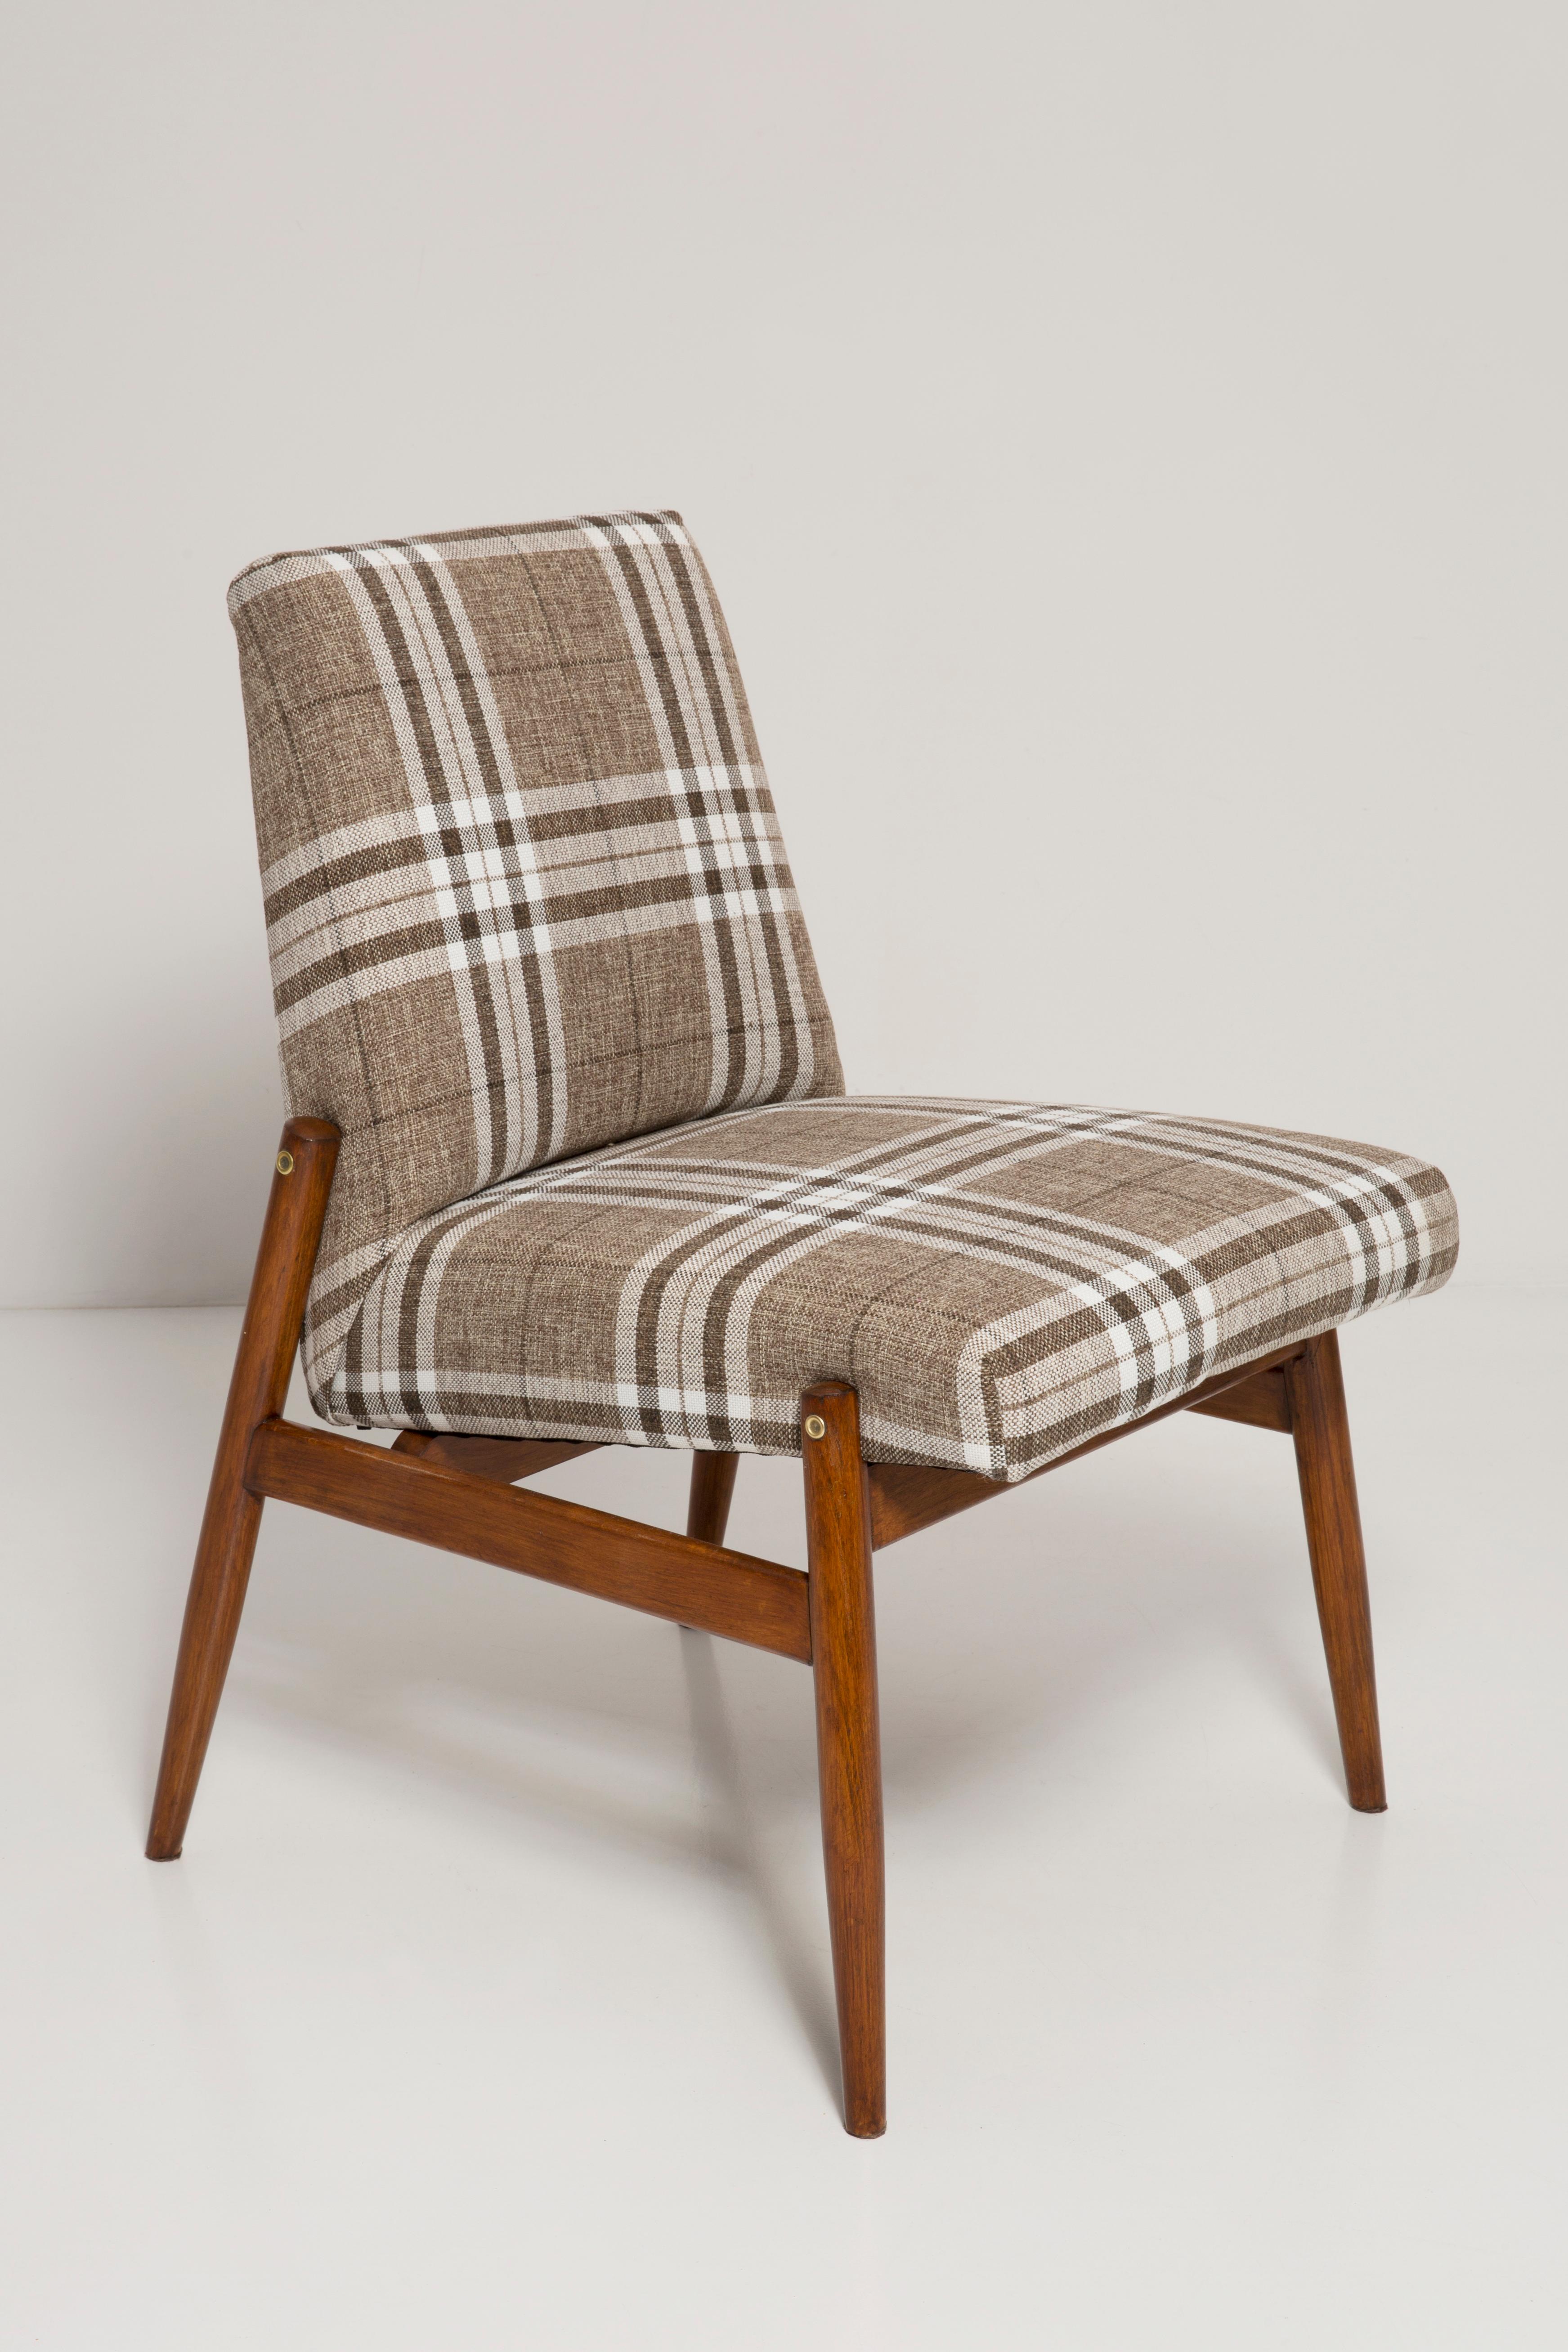 Mid-Century Modern 20th Century Beige Checkered Fabric Armchair, 300-227 Type, Europe, 1960s For Sale